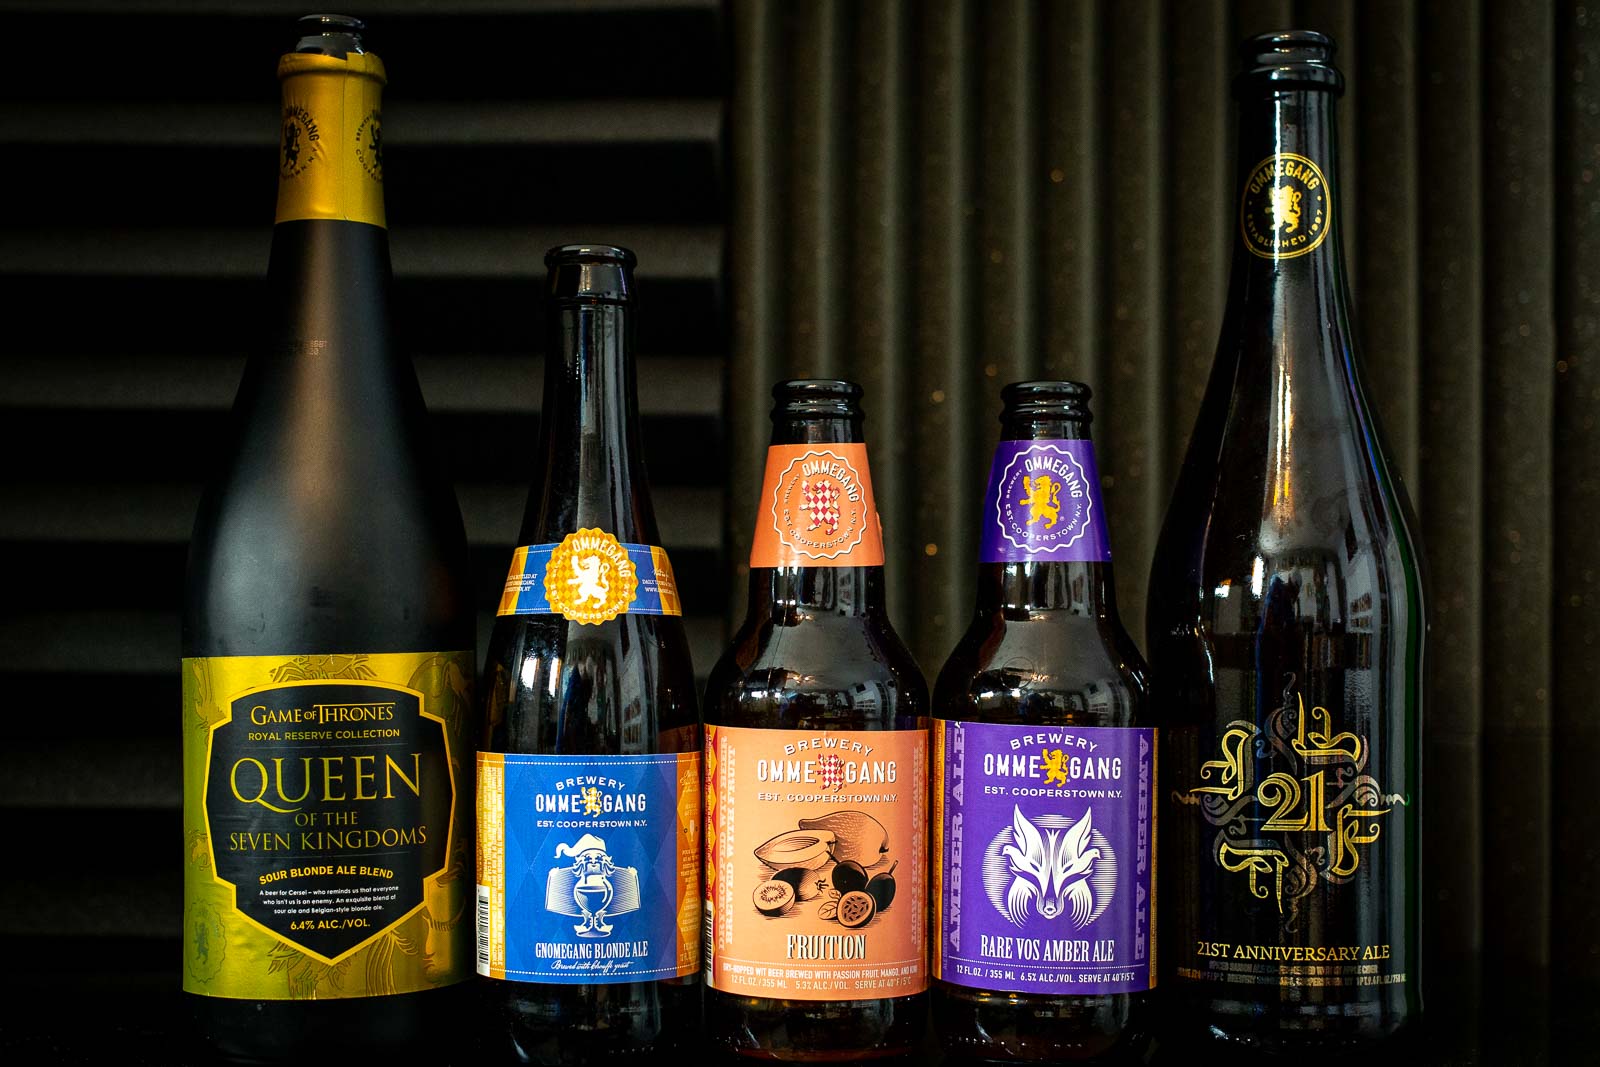 Pictured: Beers from Brewery Ommegang.